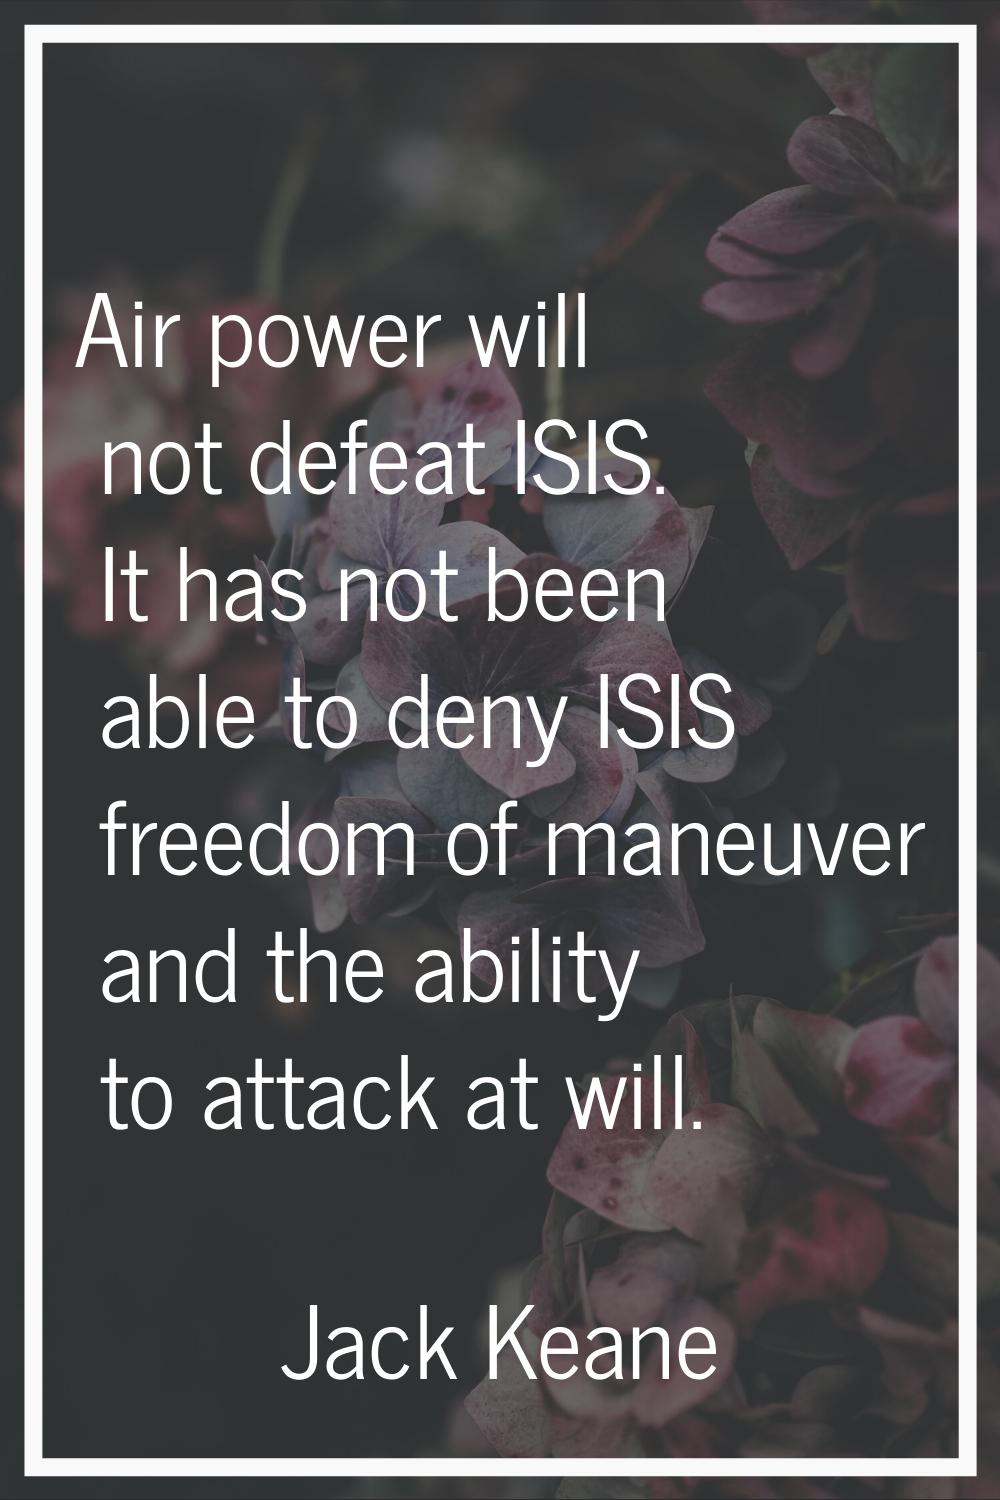 Air power will not defeat ISIS. It has not been able to deny ISIS freedom of maneuver and the abili